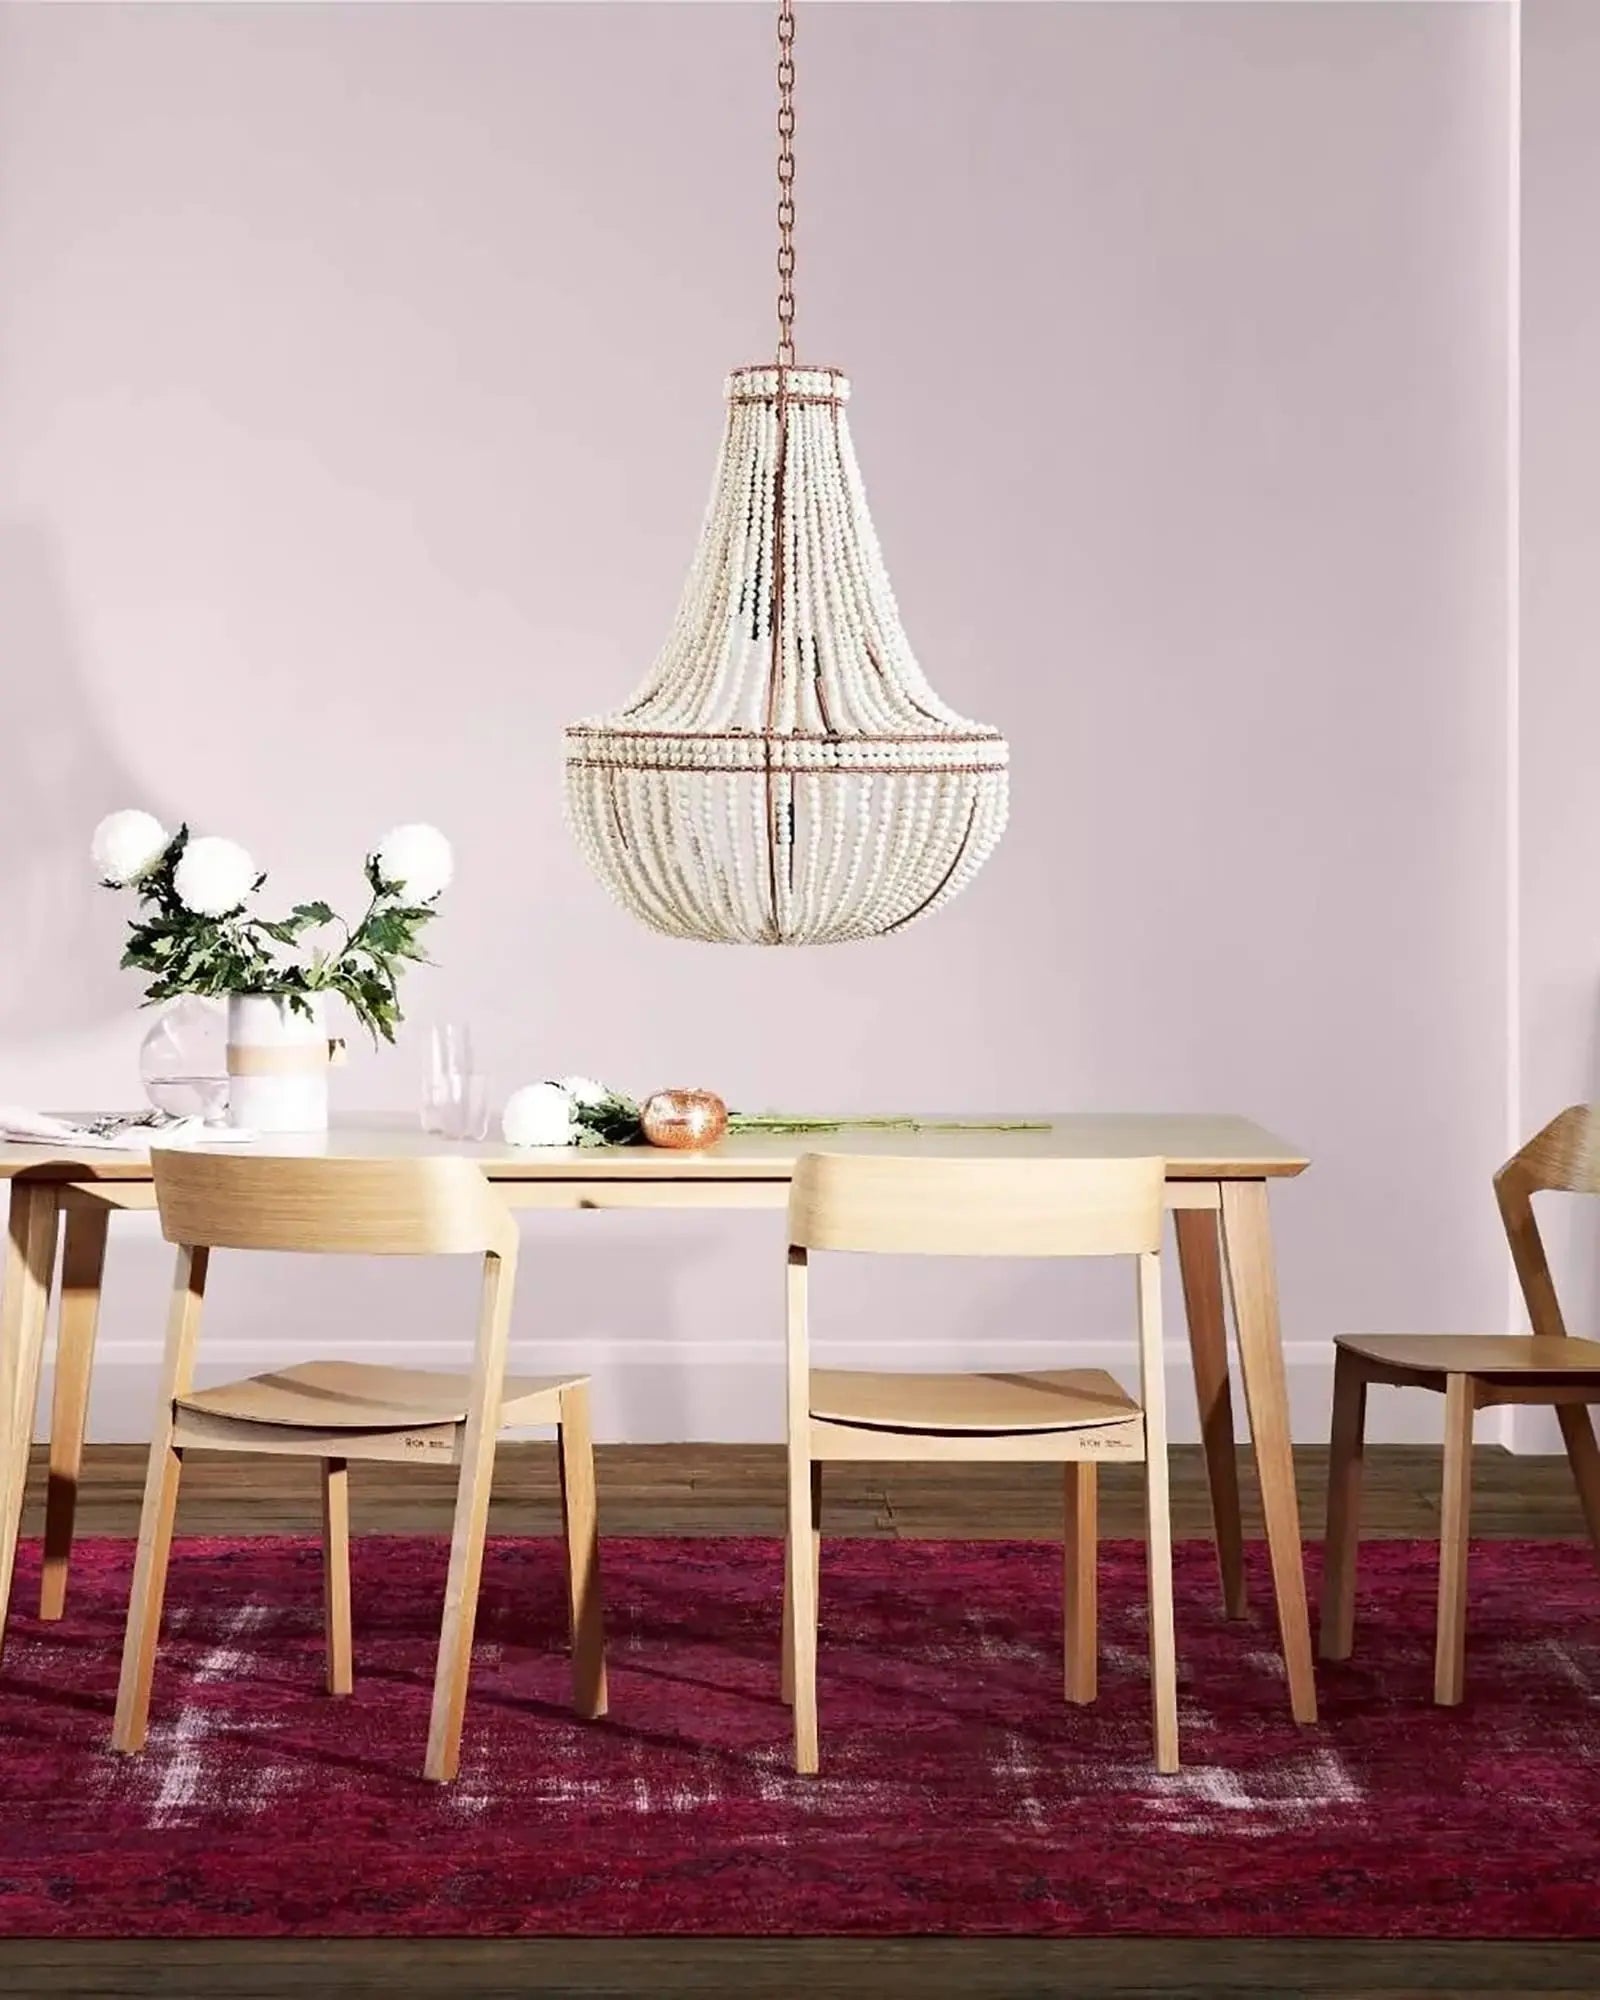 Sash Pendant Light  above a dining table